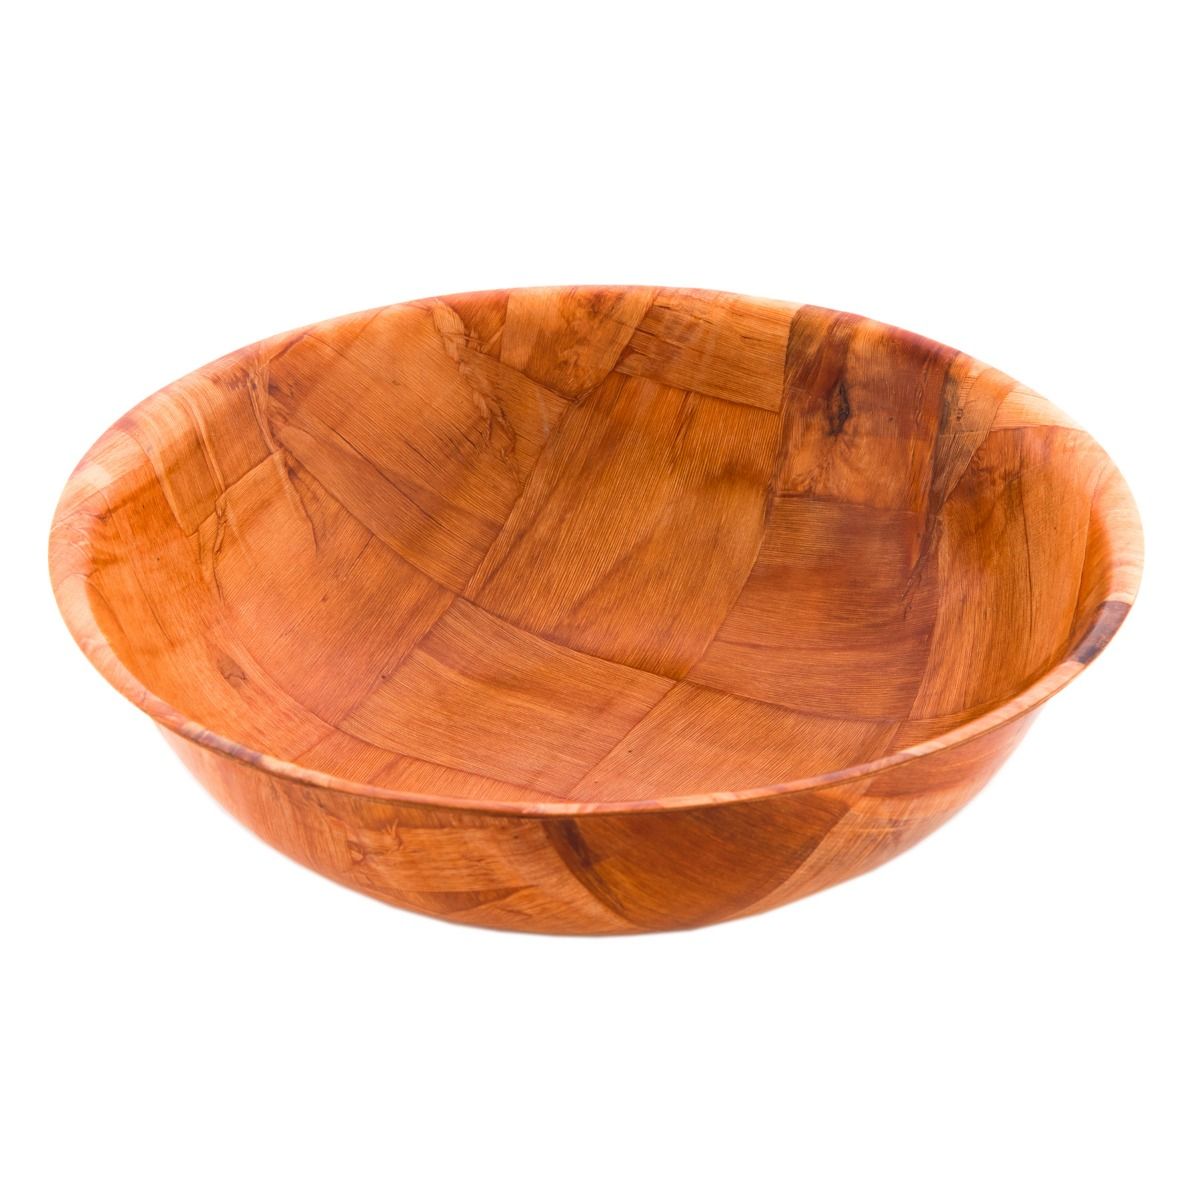 Winware by Winco Woven Wooden Salad Bowl Size 12" x 2-3/4" 